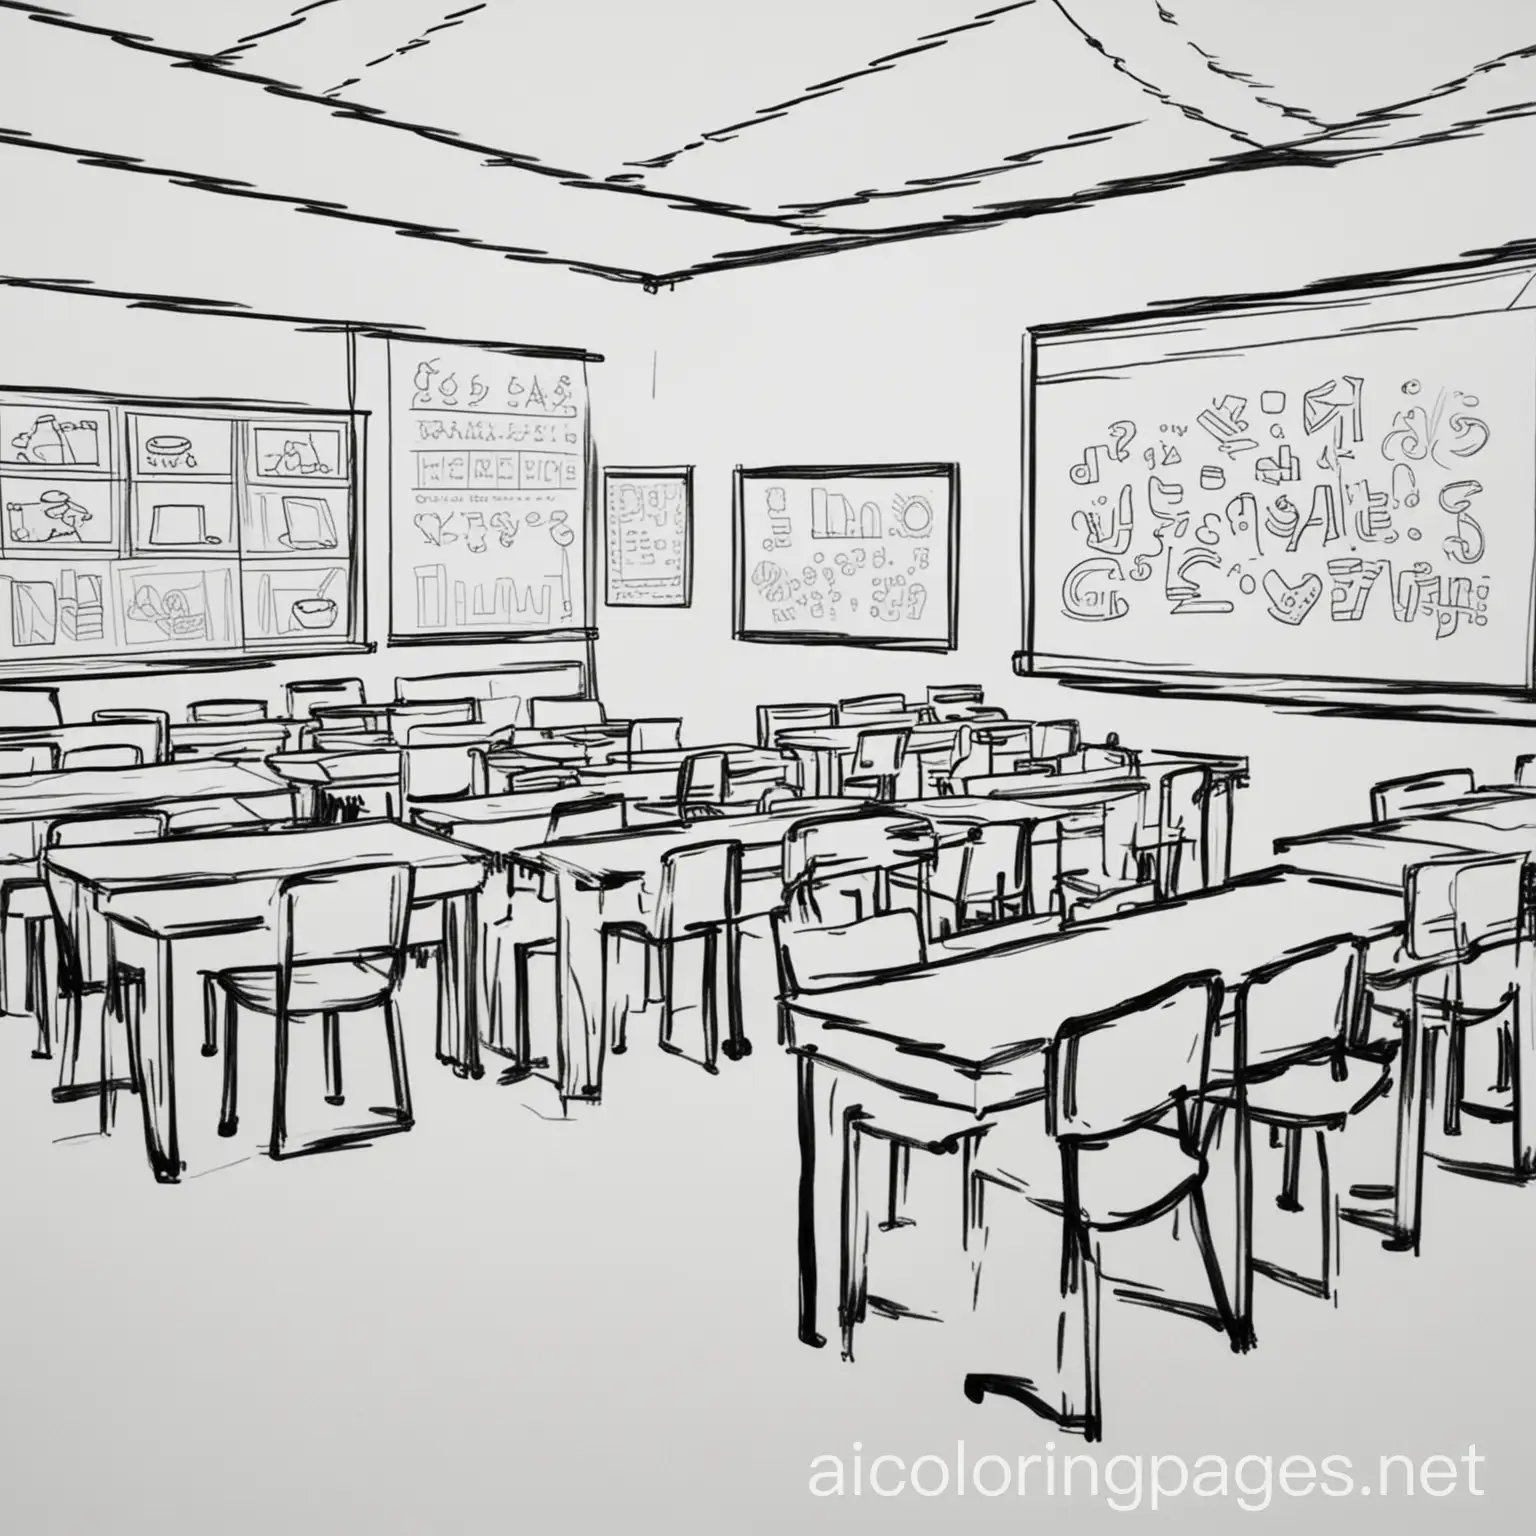 classroom, Coloring Page, black and white, line art, white background, Simplicity, Ample White Space. The background of the coloring page is plain white to make it easy for young children to color within the lines. The outlines of all the subjects are easy to distinguish, making it simple for kids to color without too much difficulty